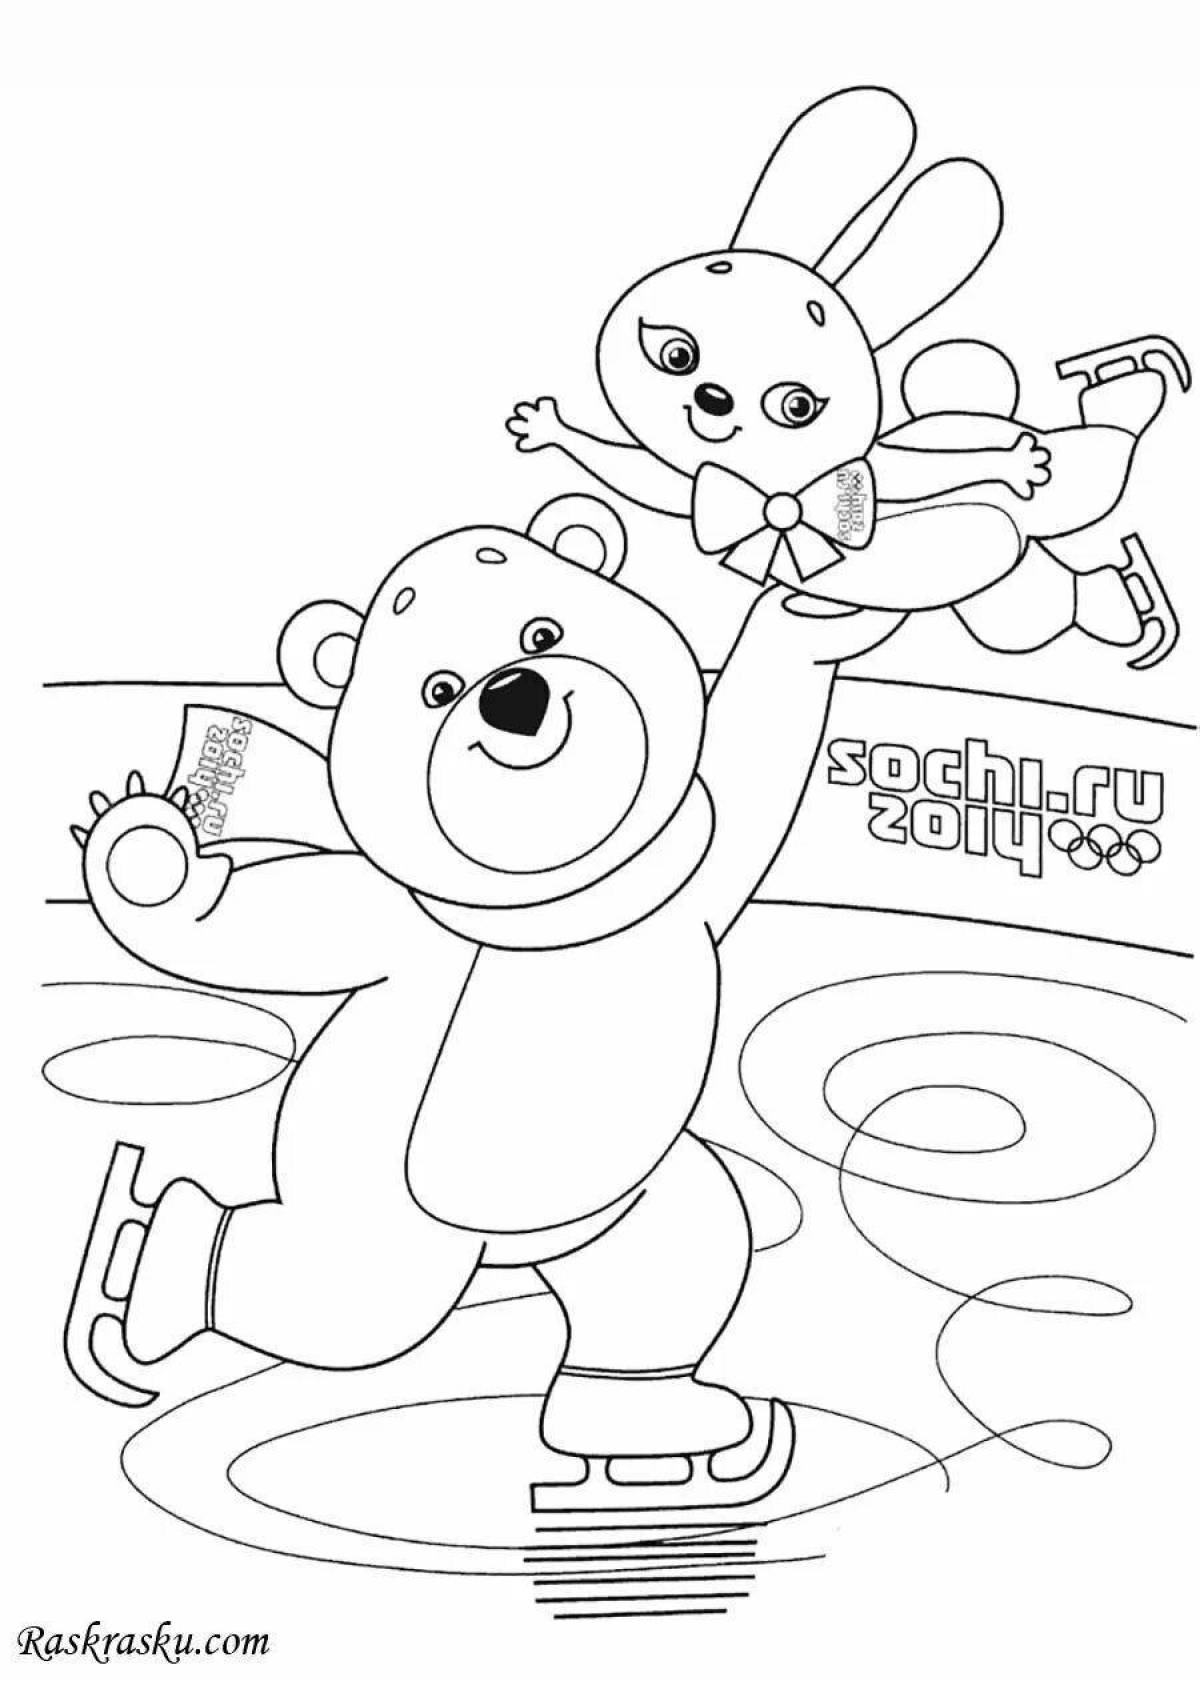 Zany winter olympic games for kids